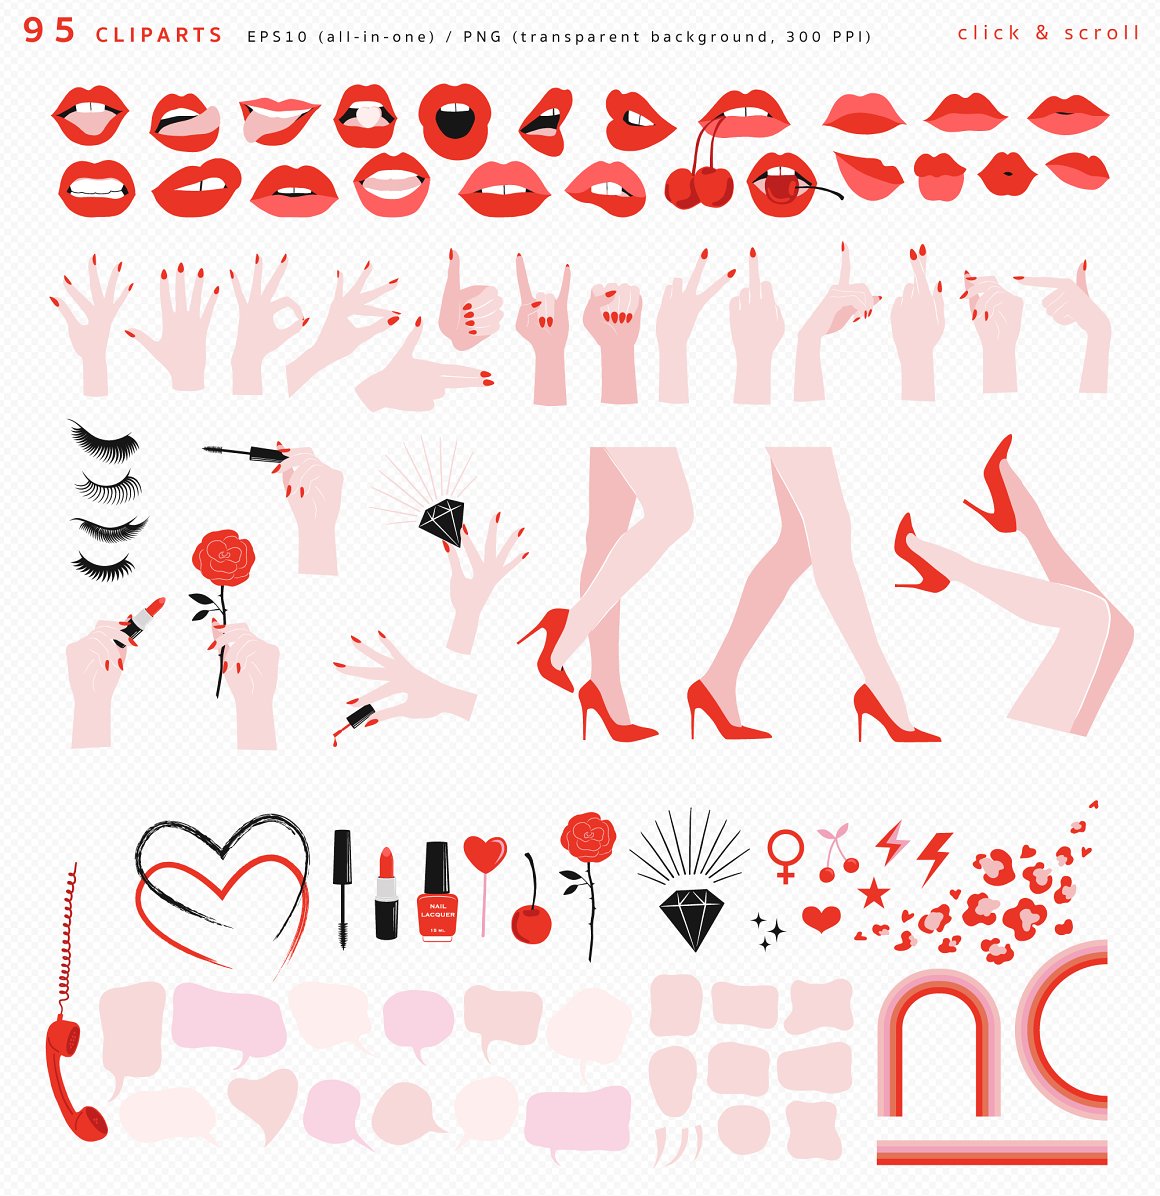 Clipart of 95 different sassy girl power illustrations.